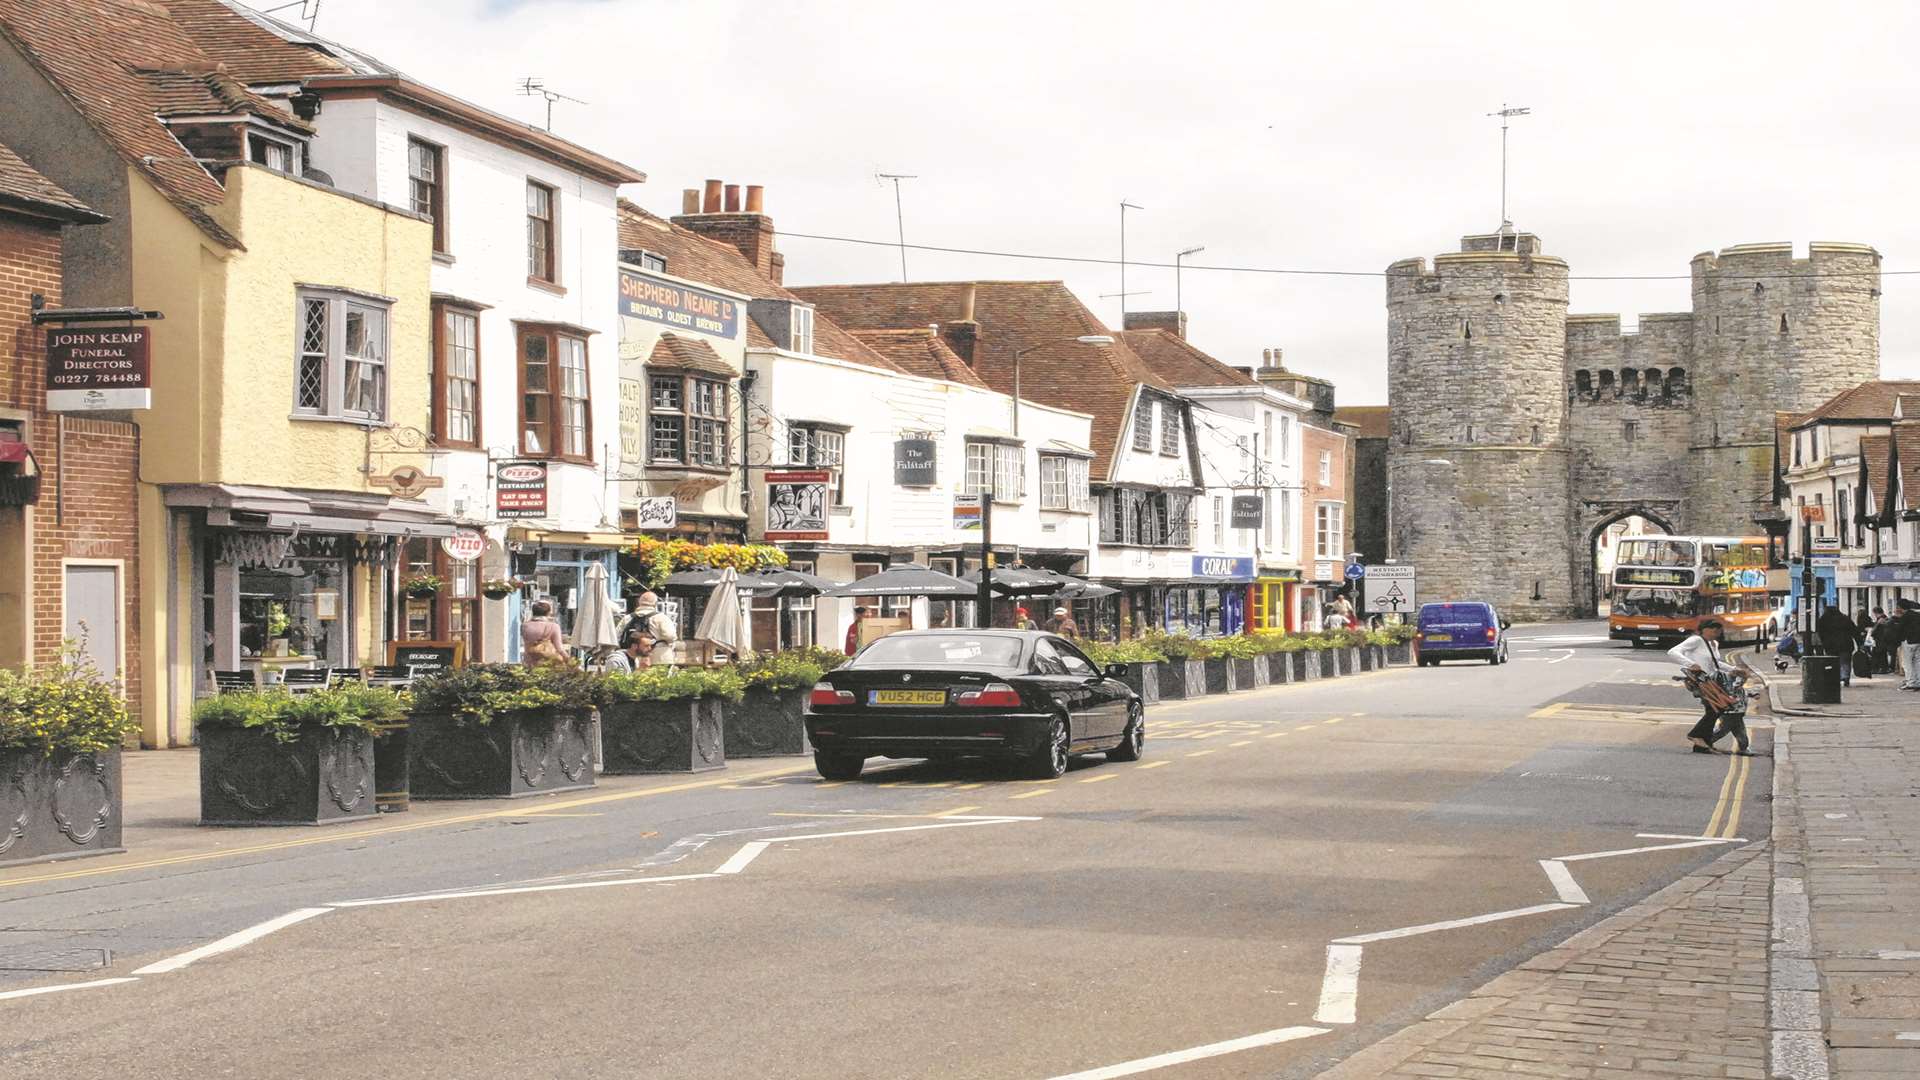 Firefighters were called to a blaze at a pub in St Dunstan's Street, Canterbury.